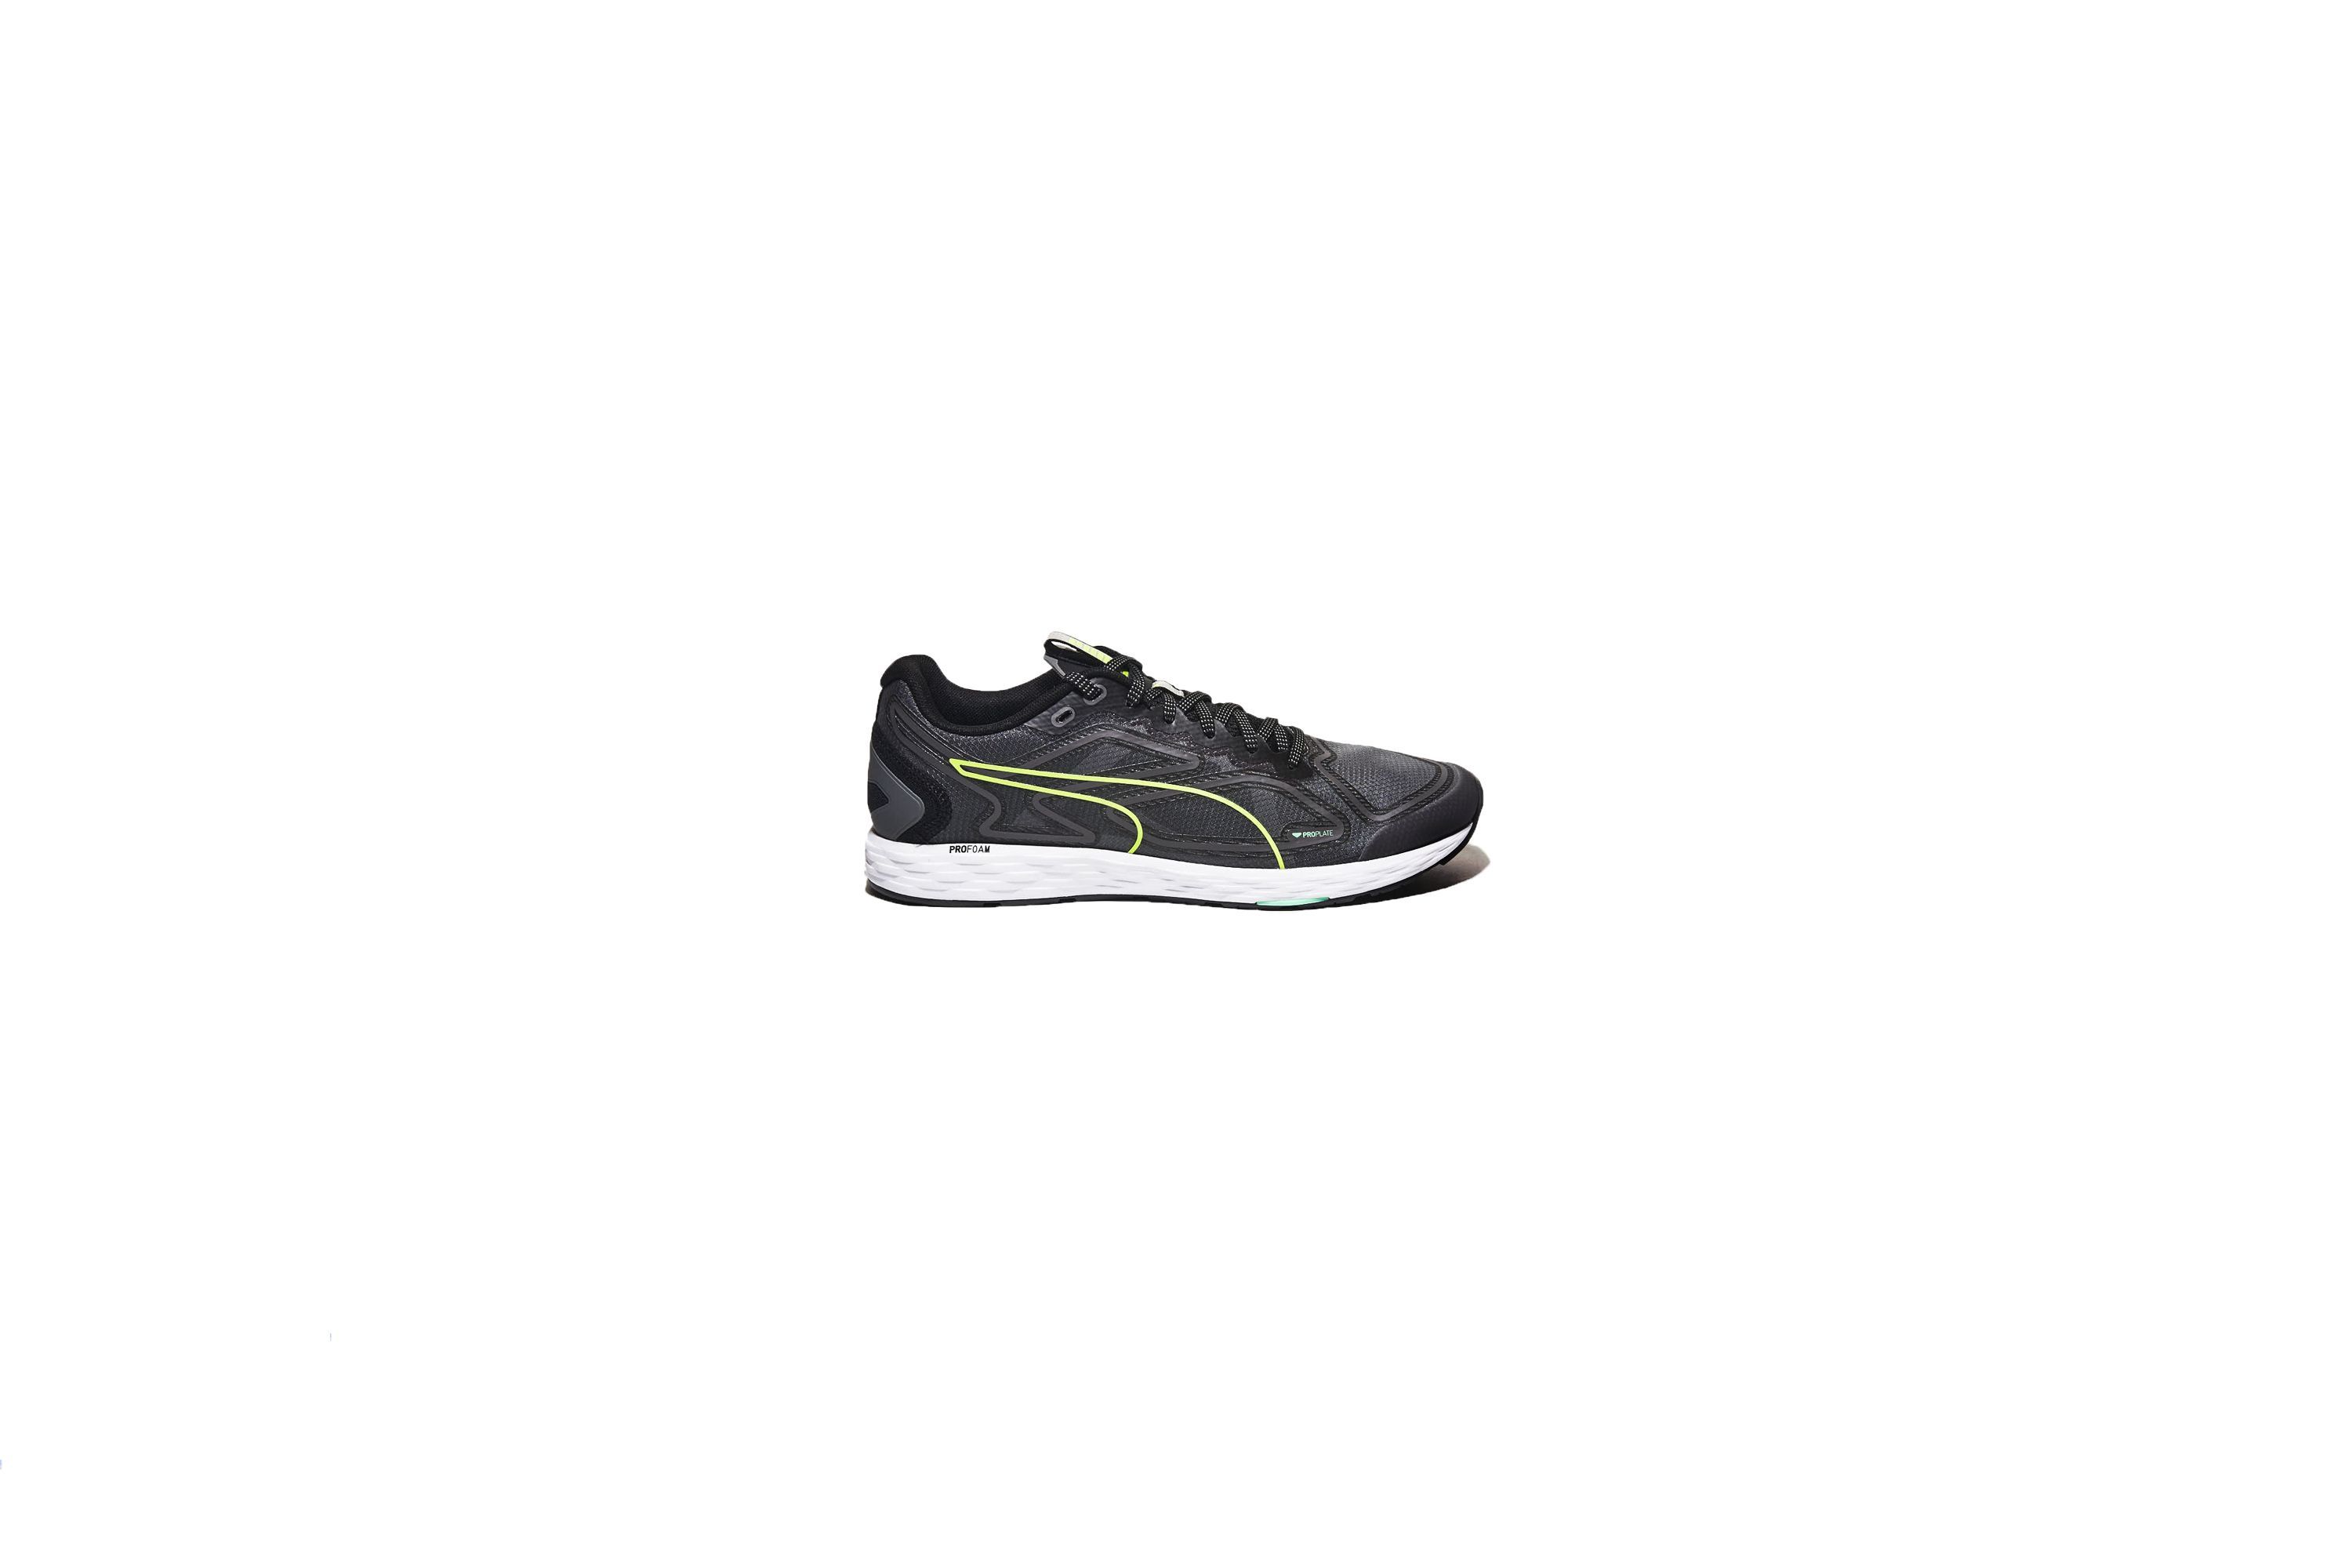 puma speed 300 racer review